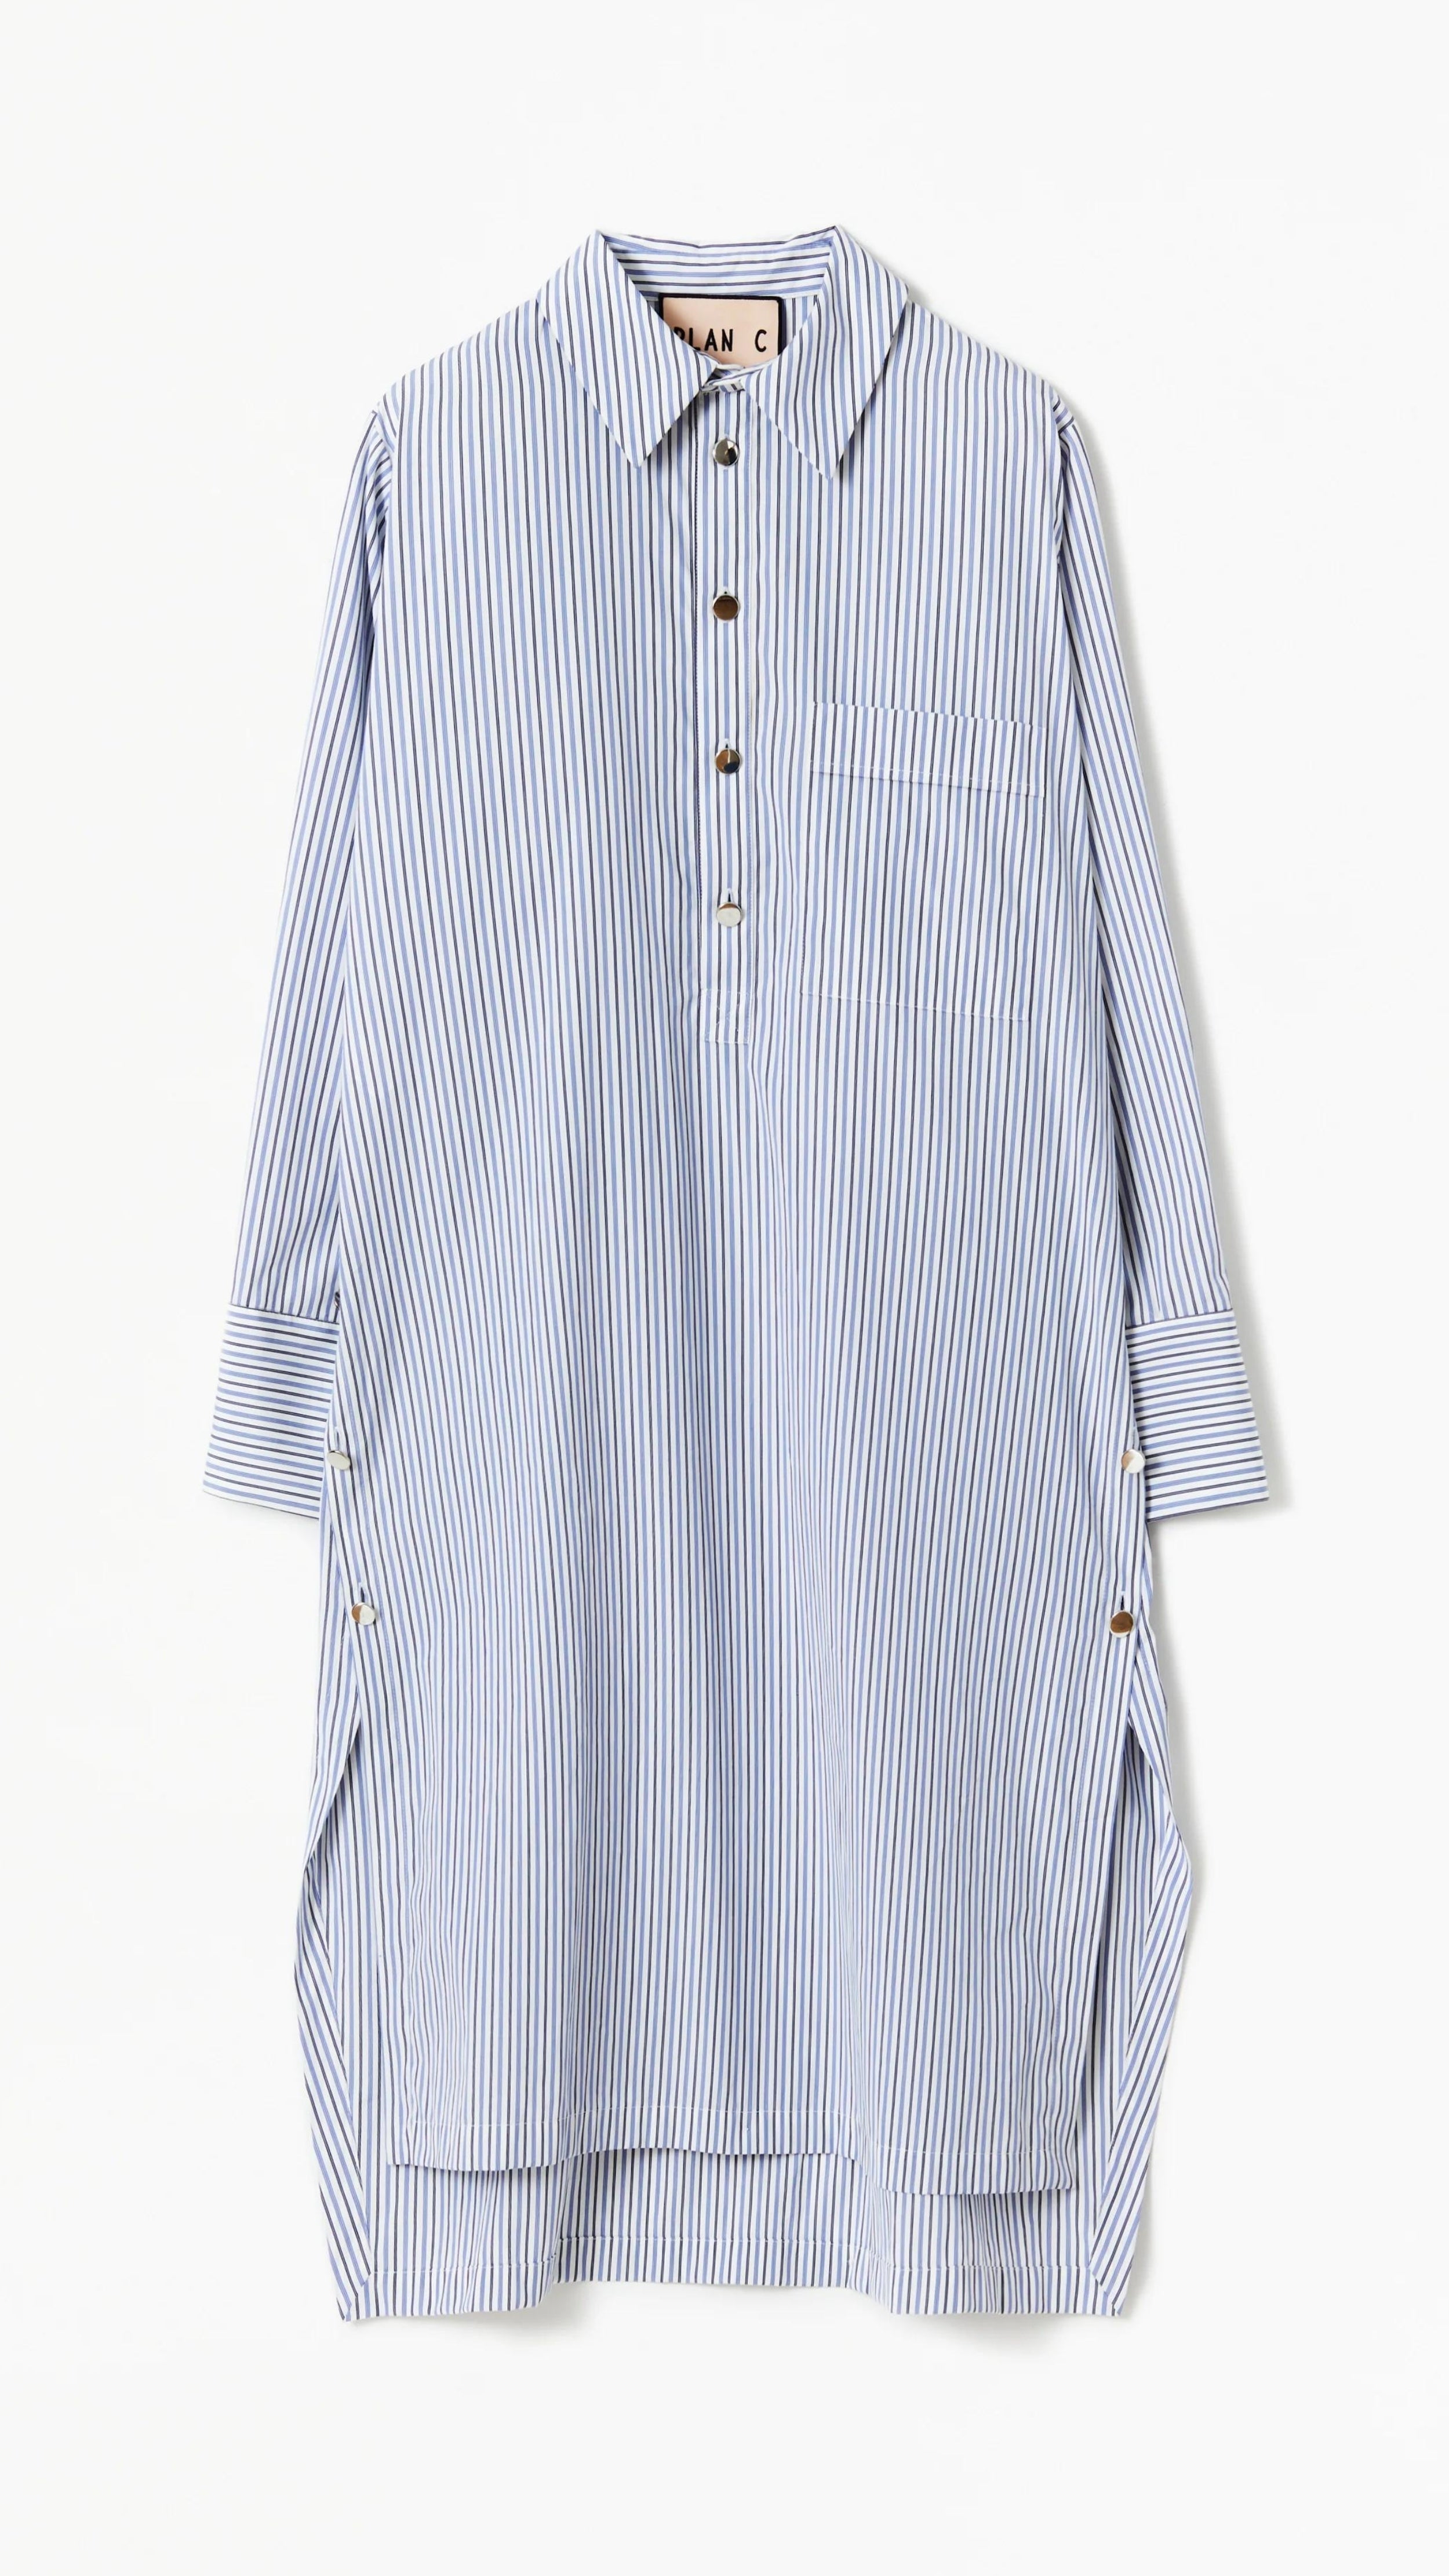 Plan C Striped Cotton Poplin Shirt Dress Classic yet modern shirt dress made from soft cotton poplin in pale blue and white stripes. It has three silver buttons, a collared neckline, long cuffs, and a breast pocket. It&#39;s designed with a relaxed fit and side pockets. Product flat photo of the front.